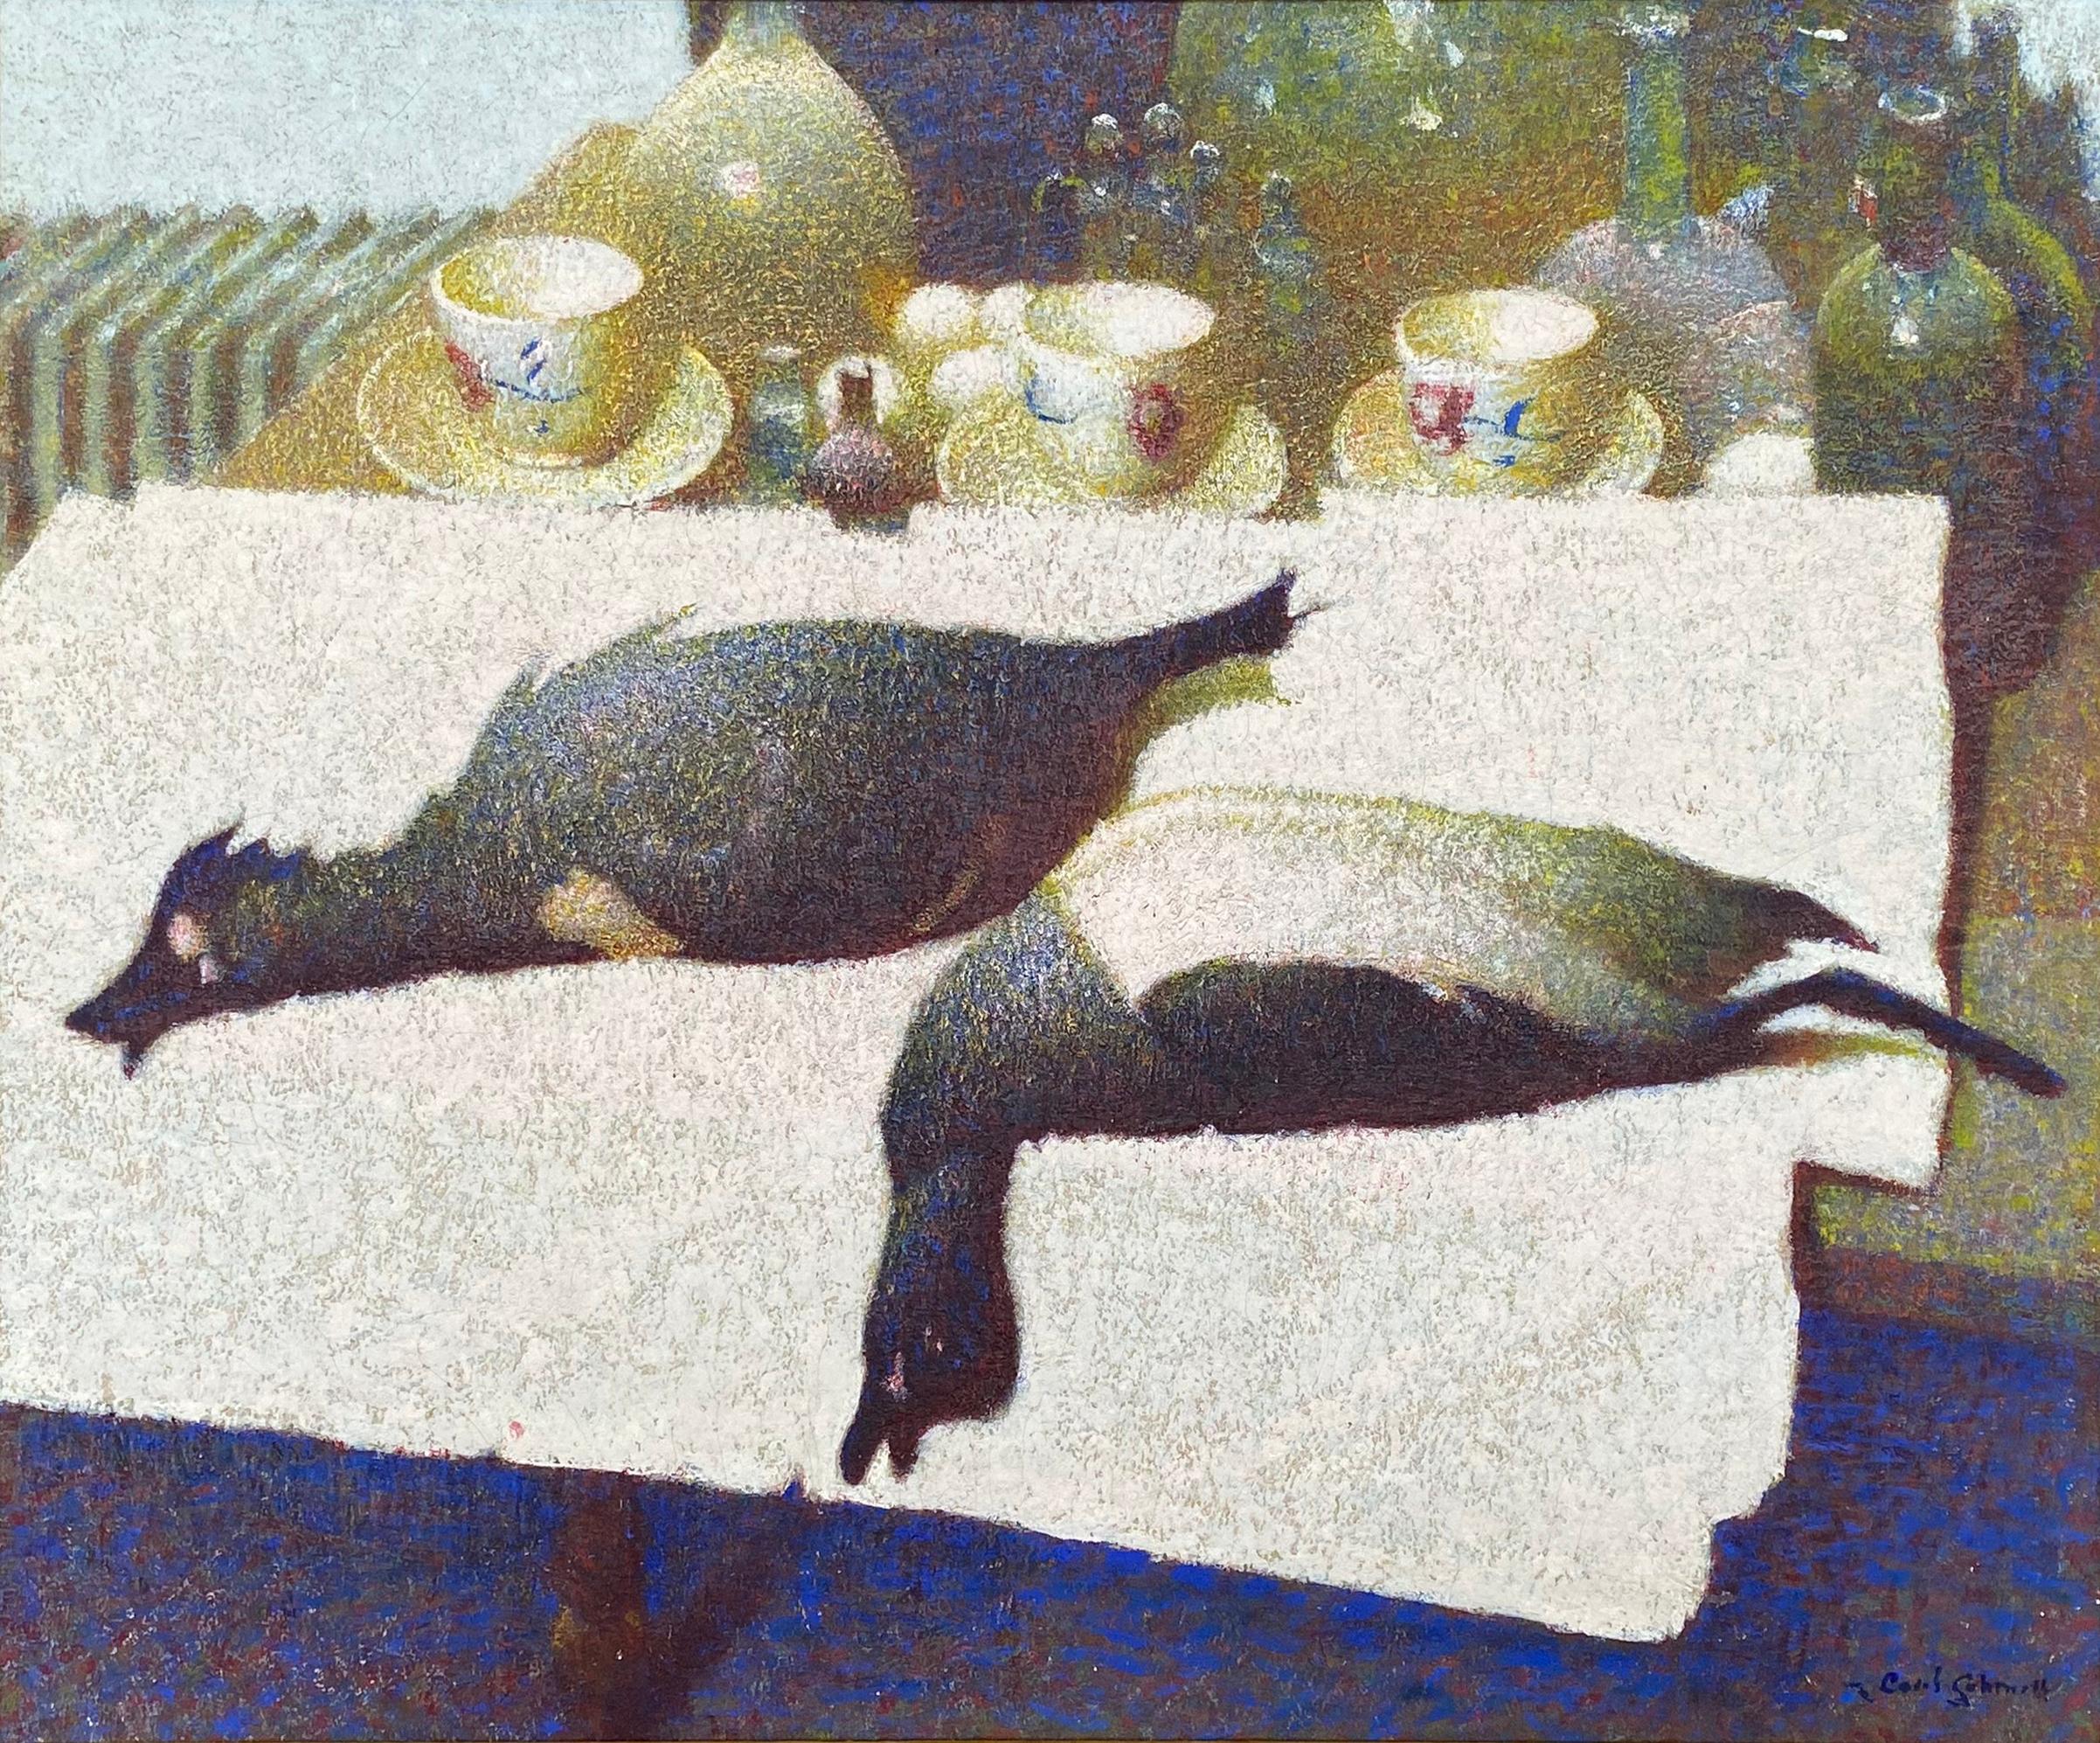 Ducks, A still life teacups and objects - American Realist Painting by Carl Schmitt